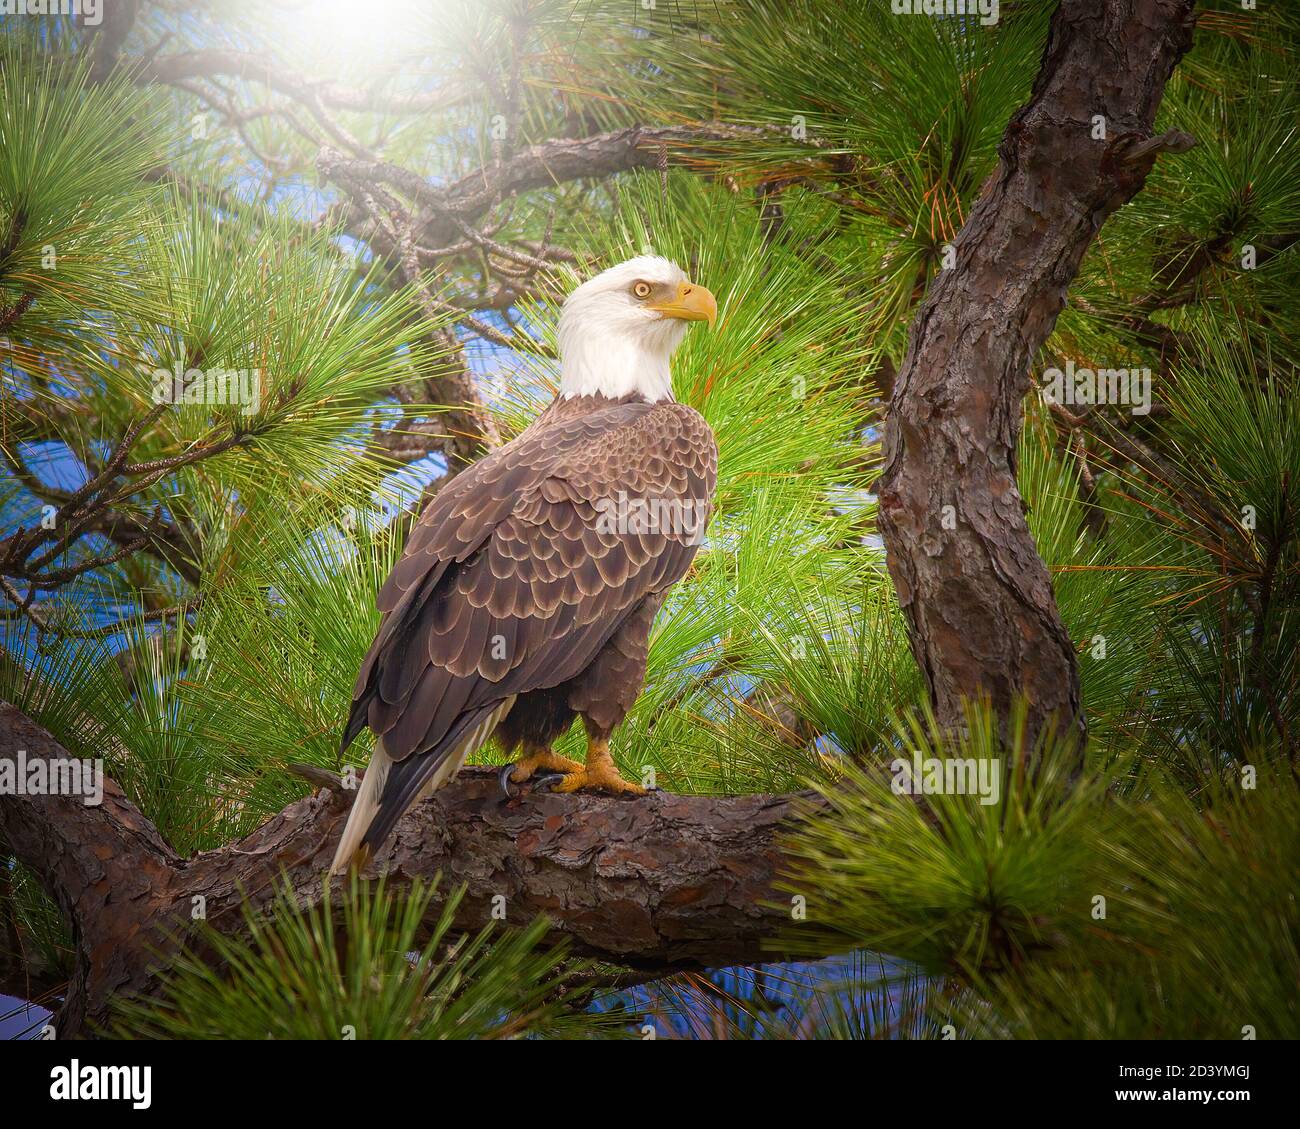 A Bald Eagle perches in a slash pine tree in the Florida Everglades before taking flight a few moments later. Stock Photo